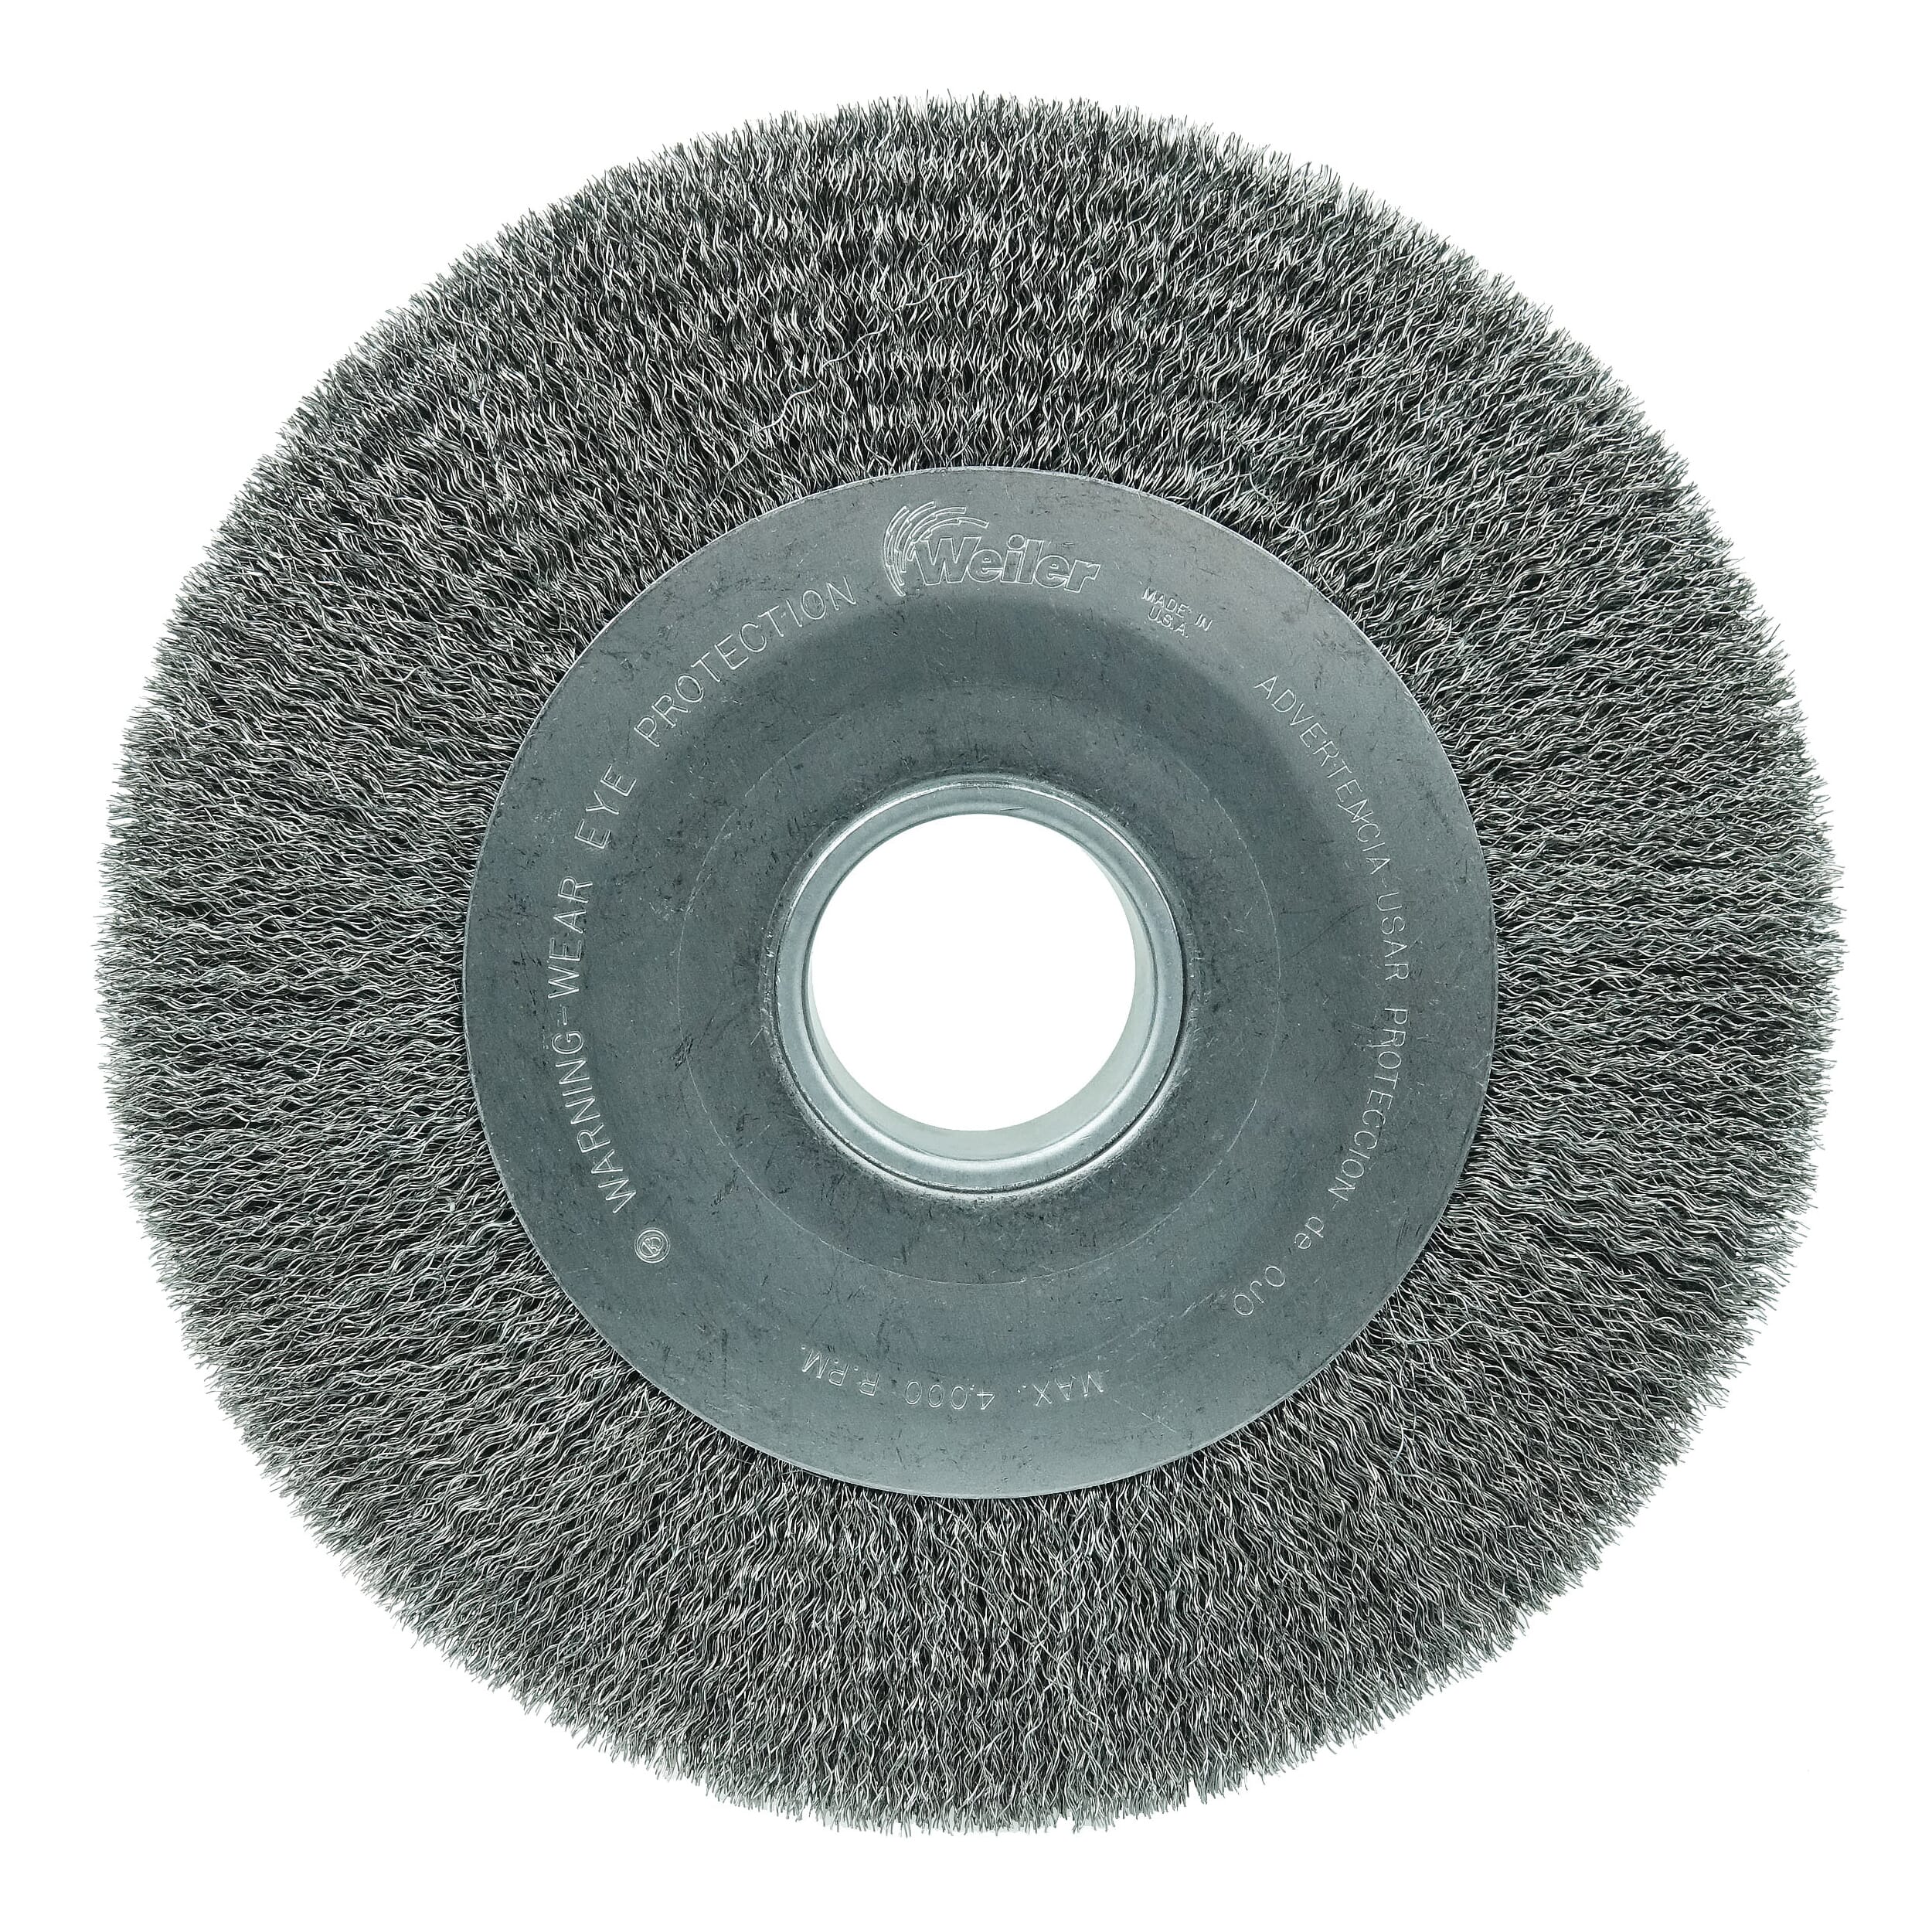 Weiler® 03190 Wide Face Wheel Brush, 10 in Dia Brush, 2 in W Face, 0.0118 in Dia Crimped Filament/Wire, 2 in Arbor Hole